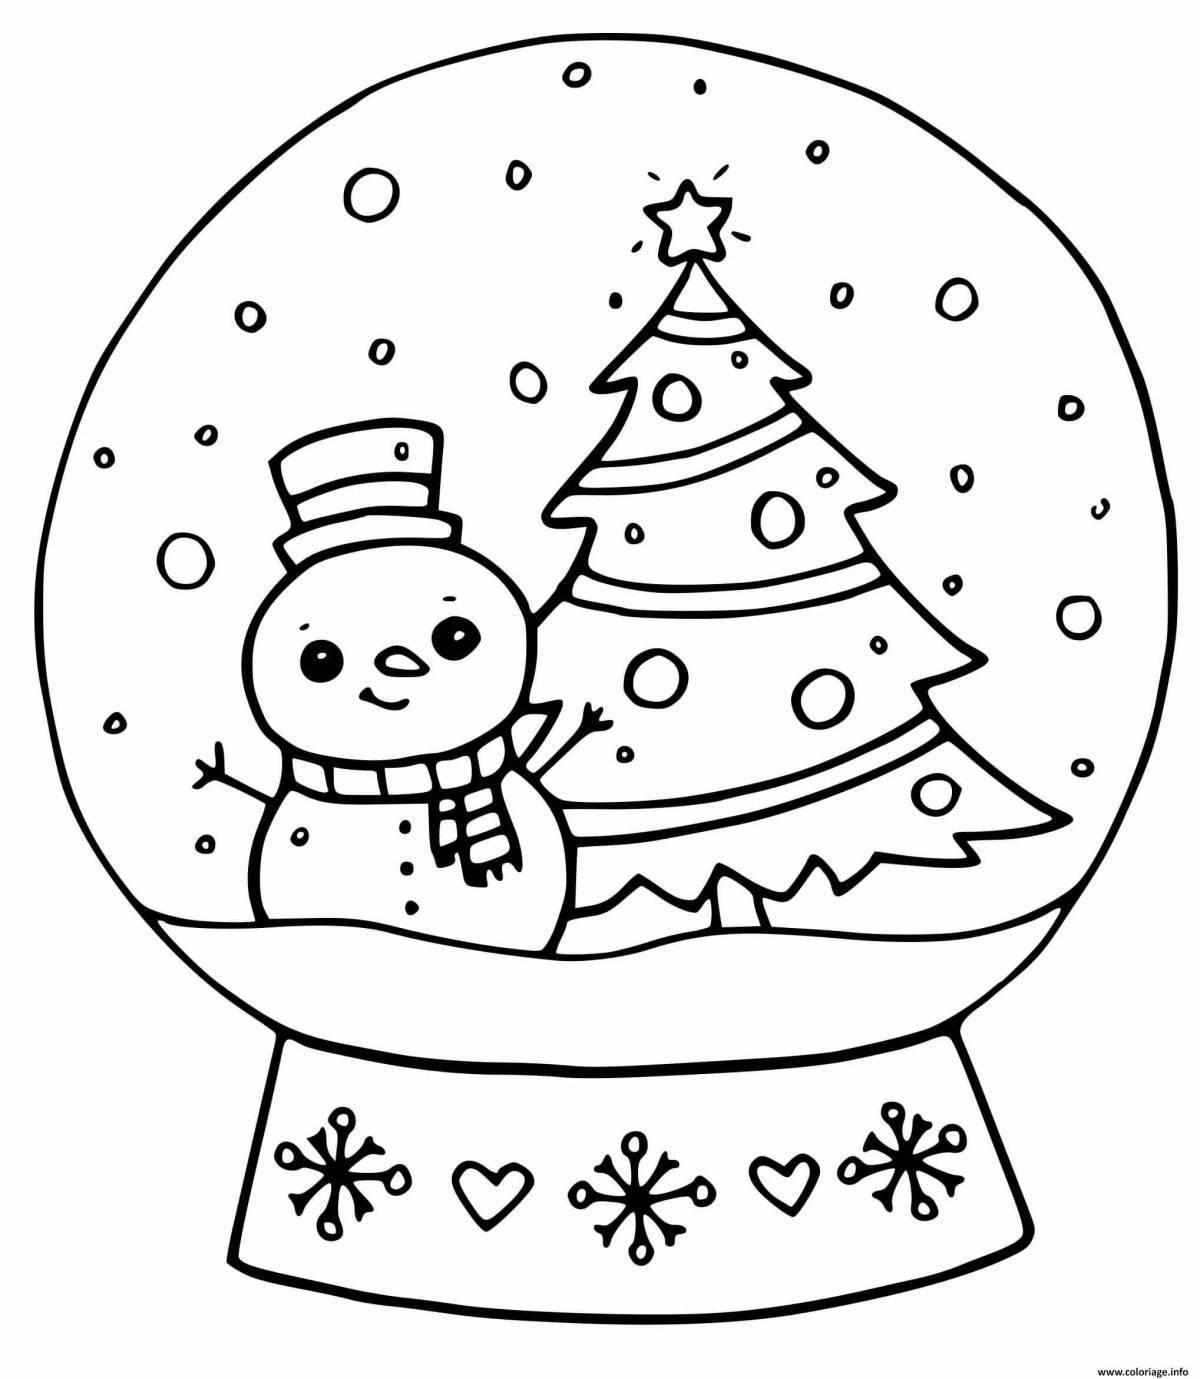 Adorable Christmas tree coloring book for kids 6-7 years old